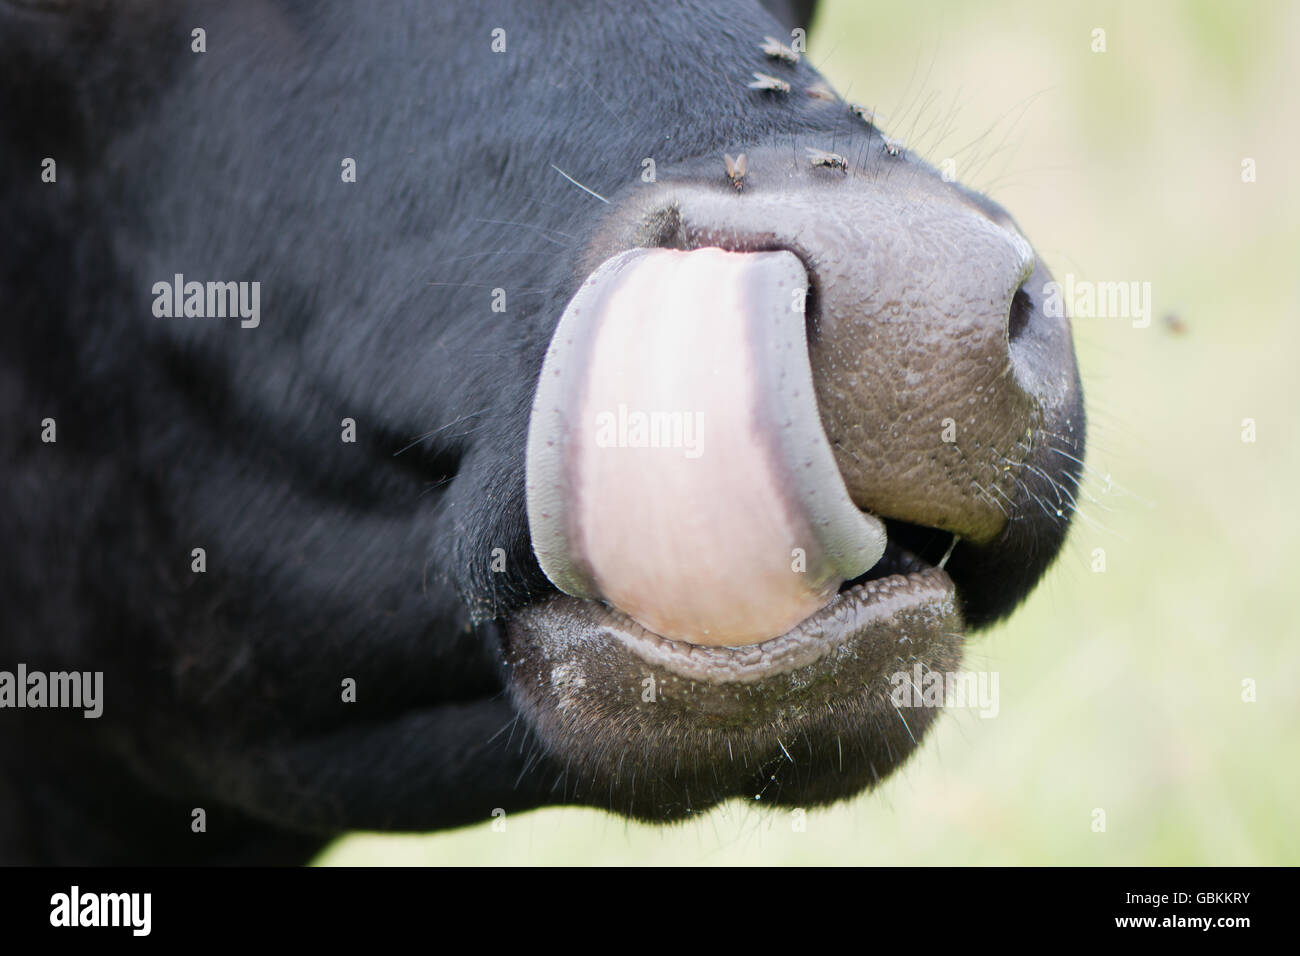 Cow sticking tongue up nose. An animal licking its nostril, with flies sitting on its wet nose Stock Photo